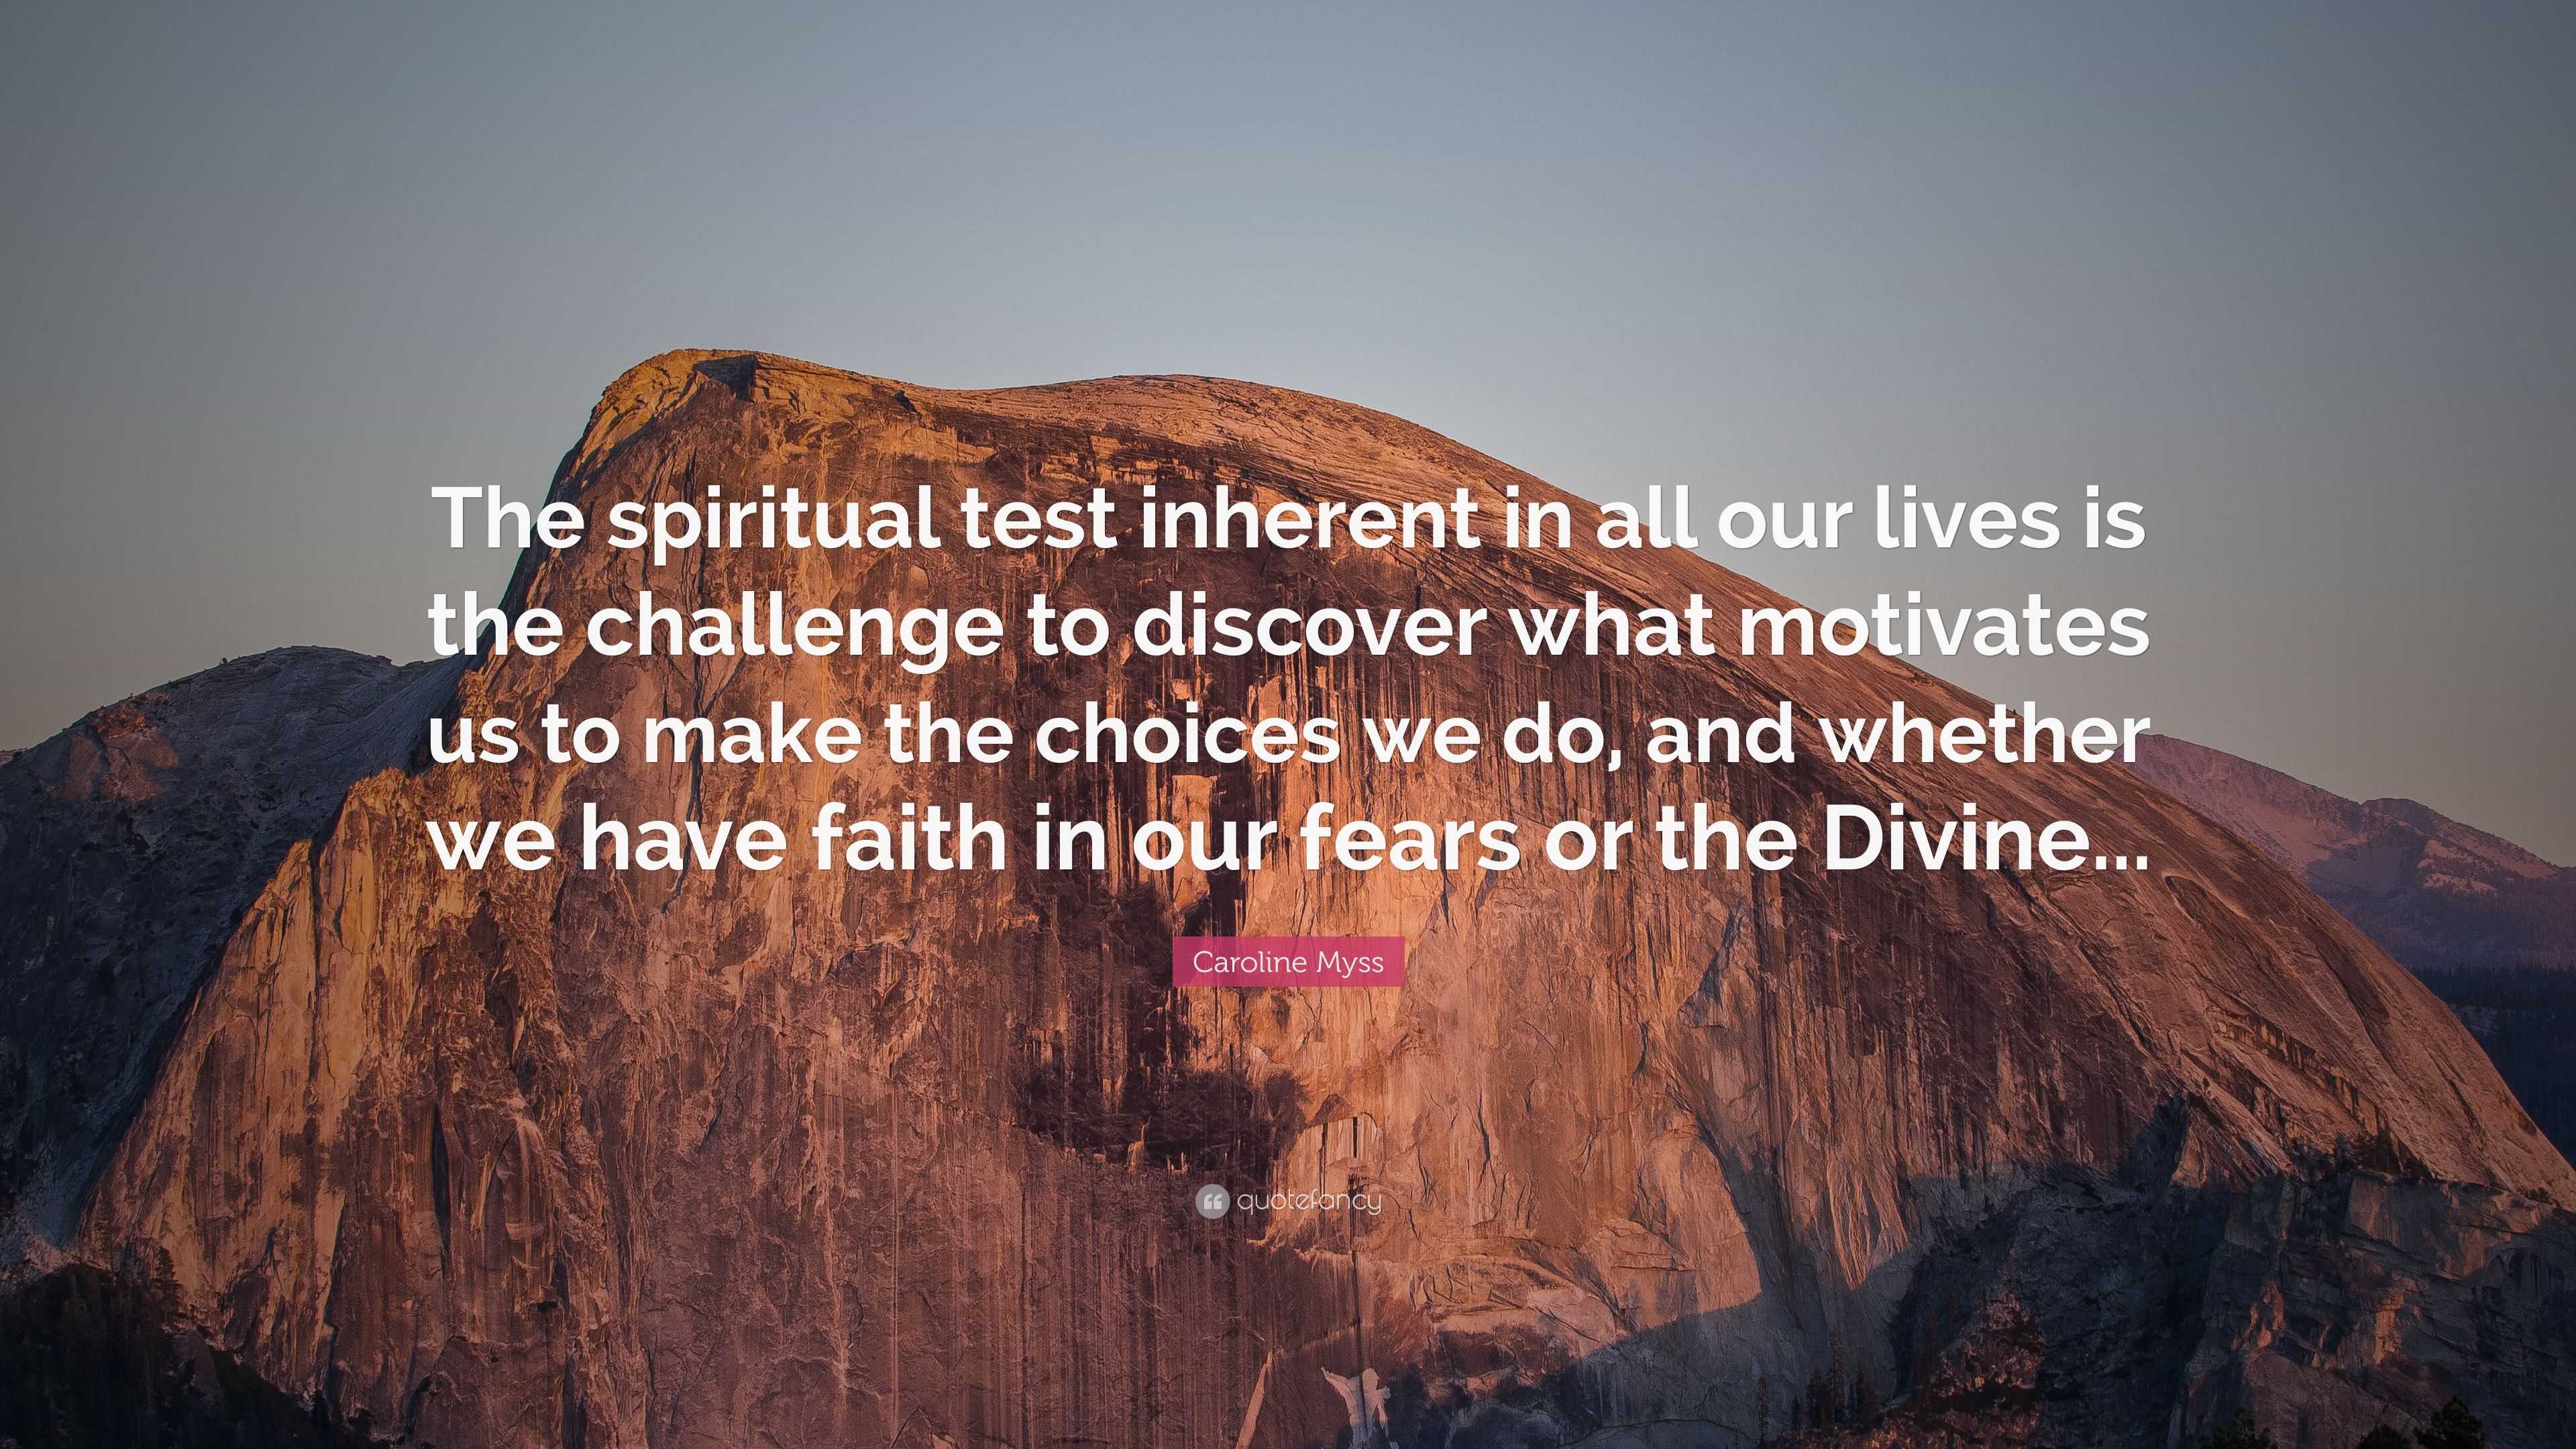 Caroline Myss Quote: “The spiritual test inherent in all our lives is